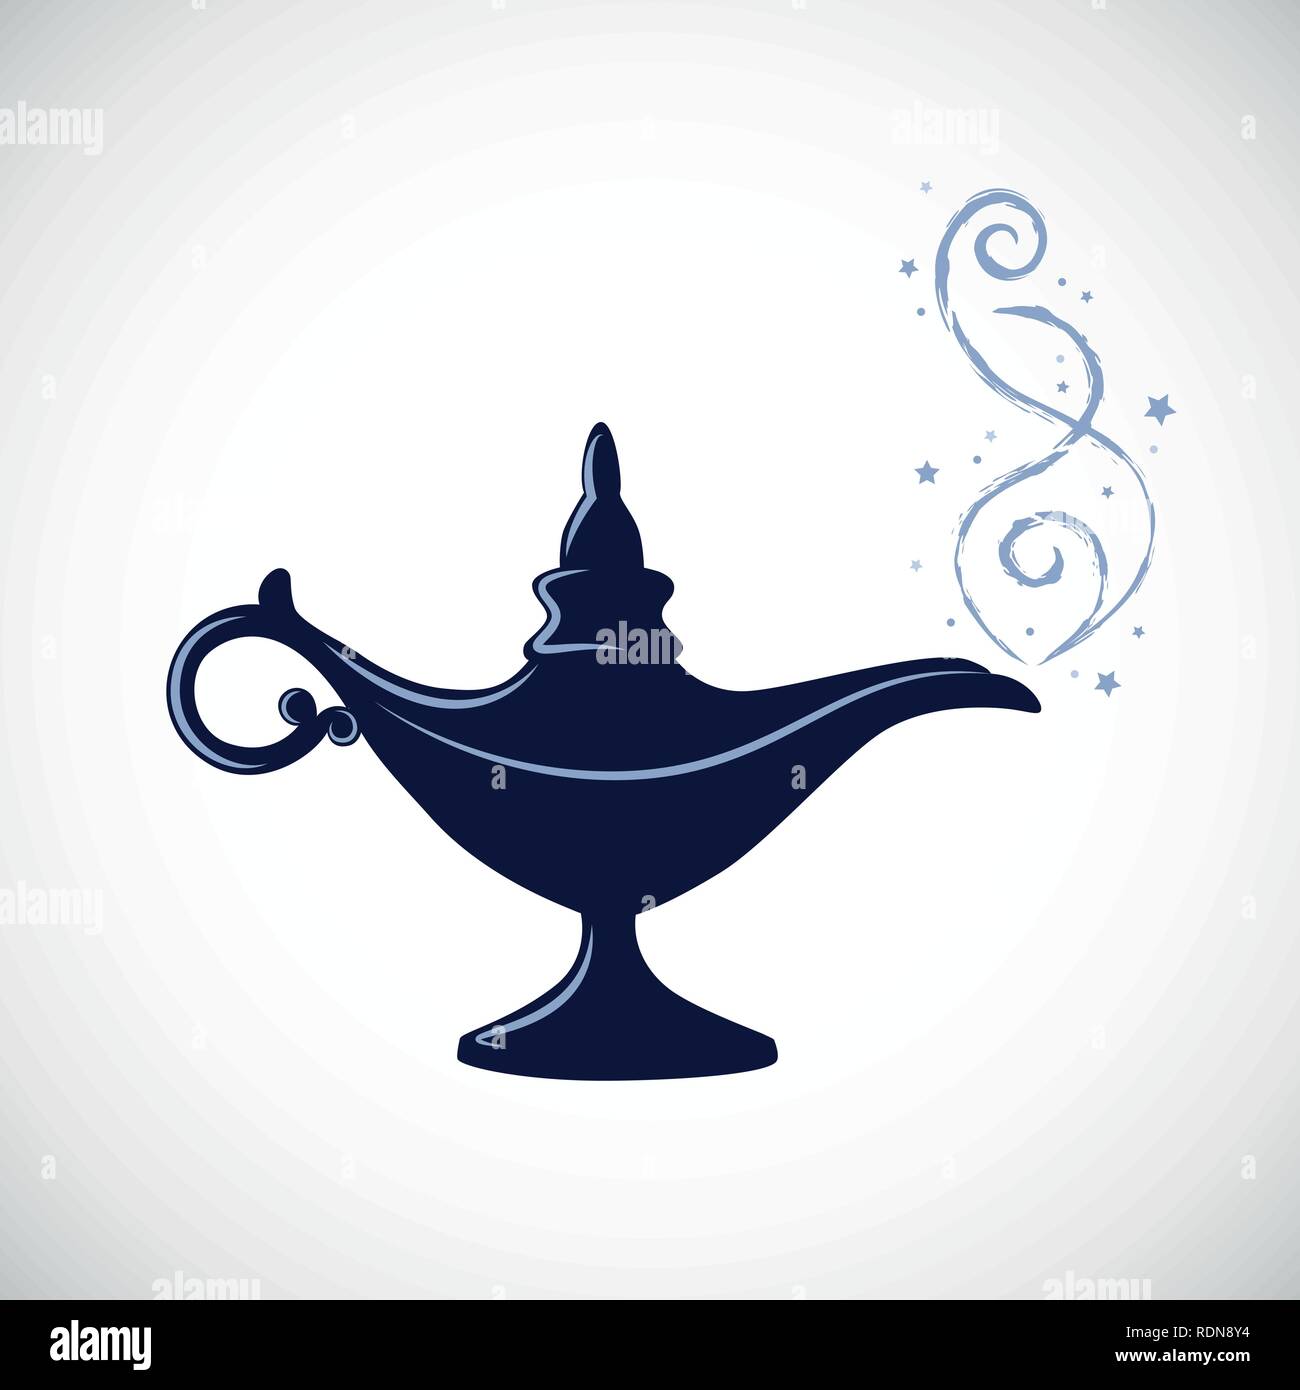 Oil lamp aladin Stock Vector Images - Alamy